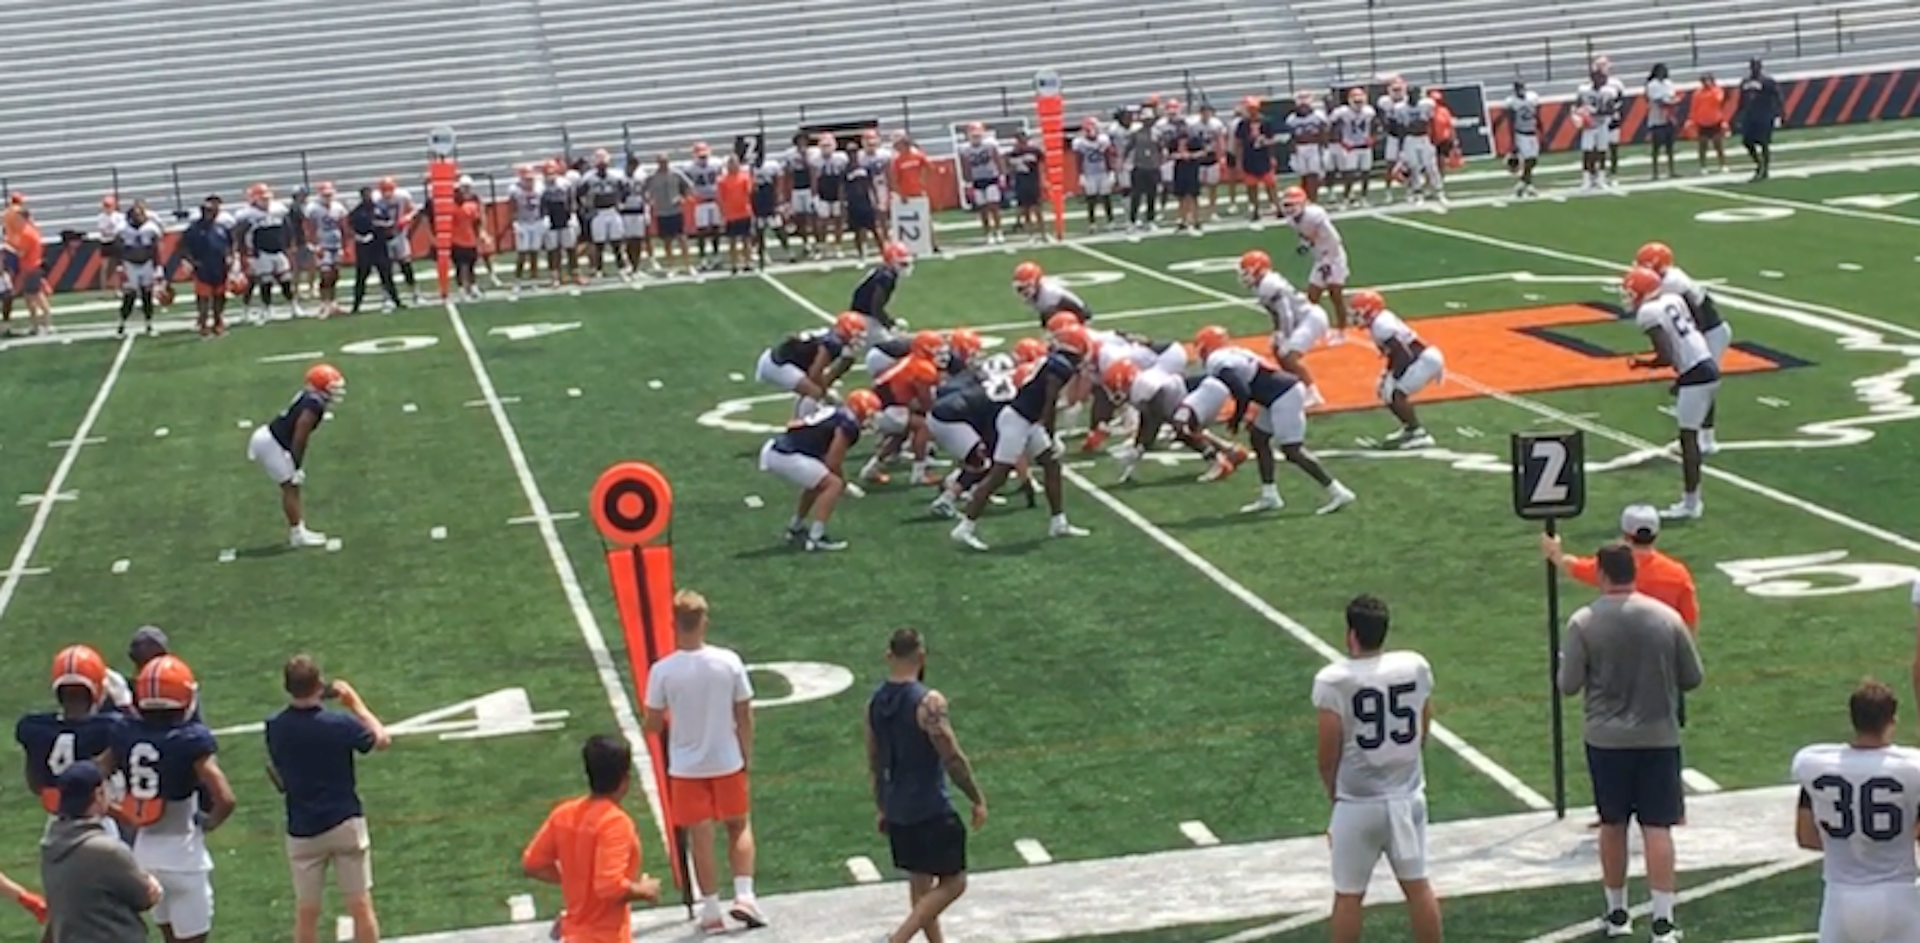 Post-Practice Report - Aug. 6 - DeVito Shines with First Team Offense & Some Freshmen Surprises